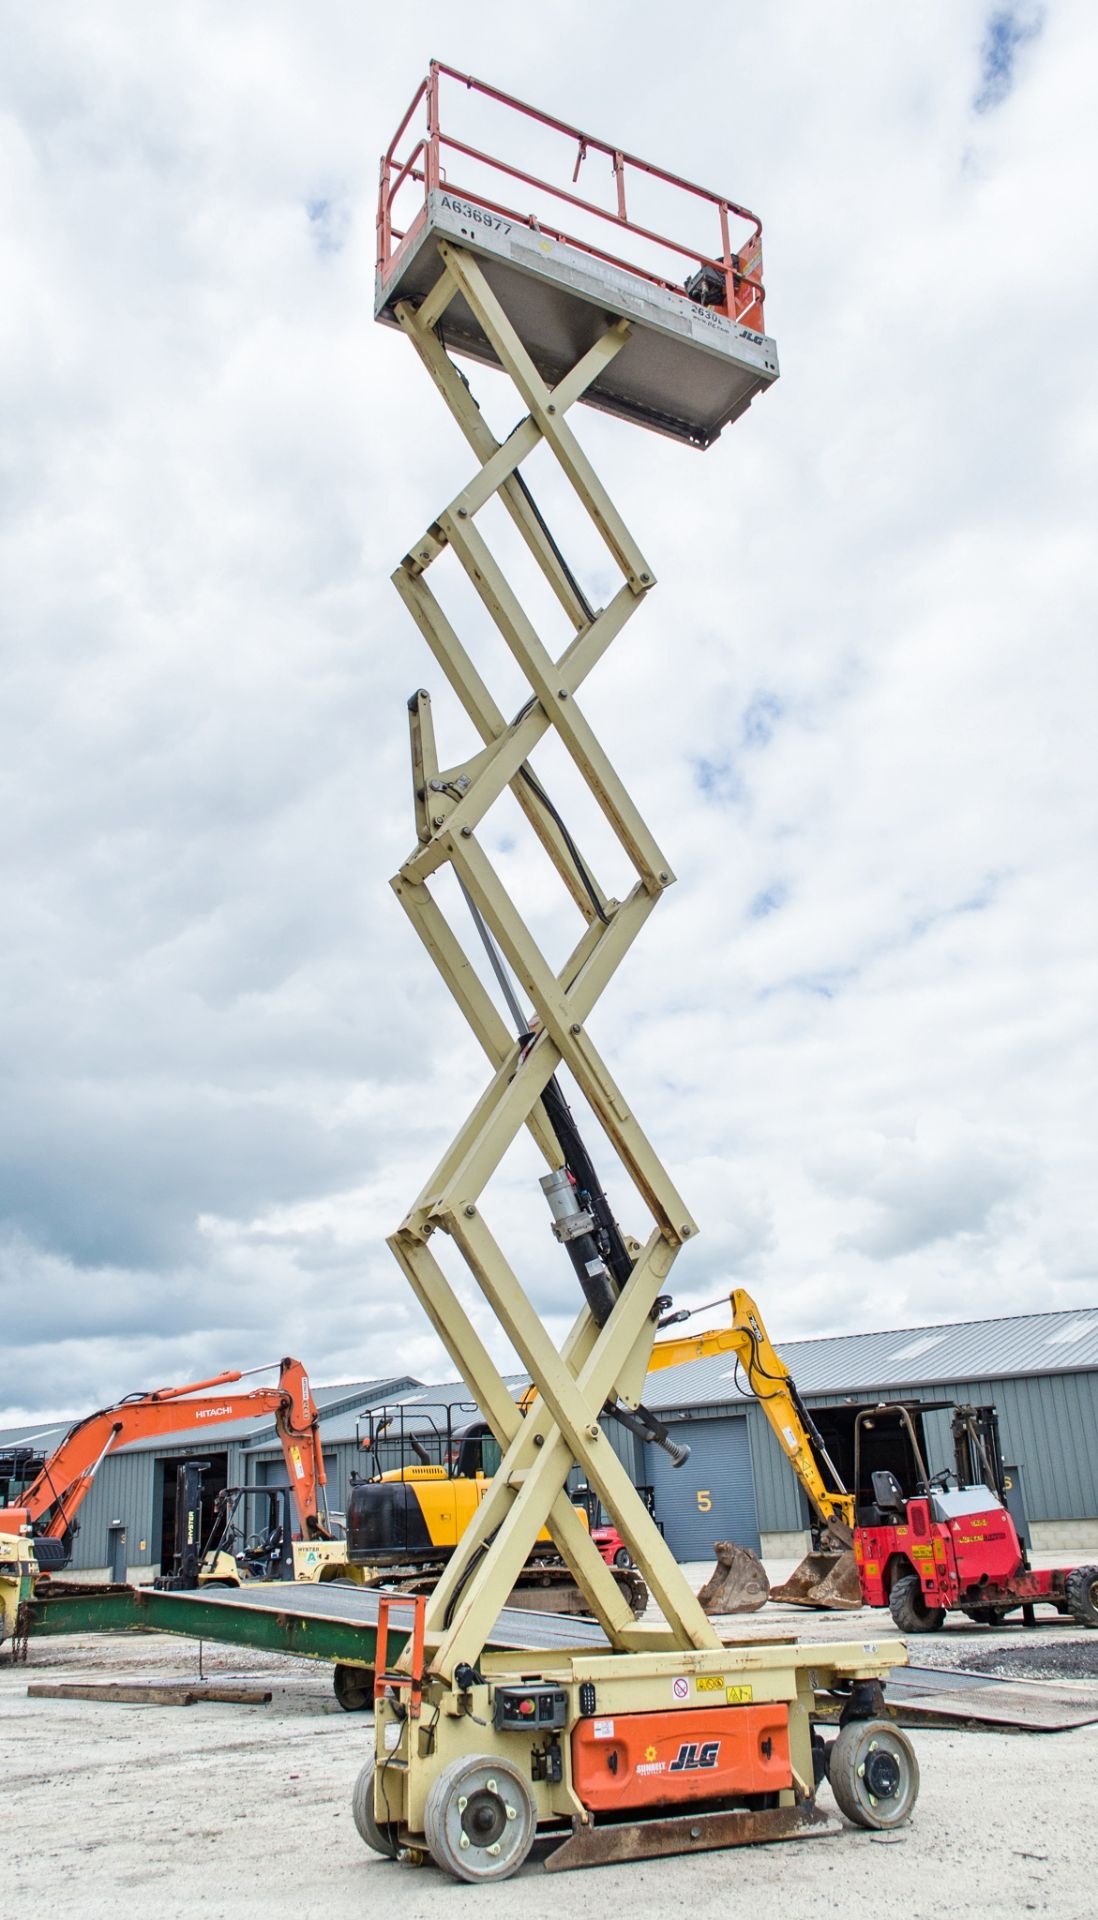 JLG 2630 ES battery electric scissor lift Year: 2014 S/N: 237301 Recorded Hours: 251 A636977 - Image 5 of 10